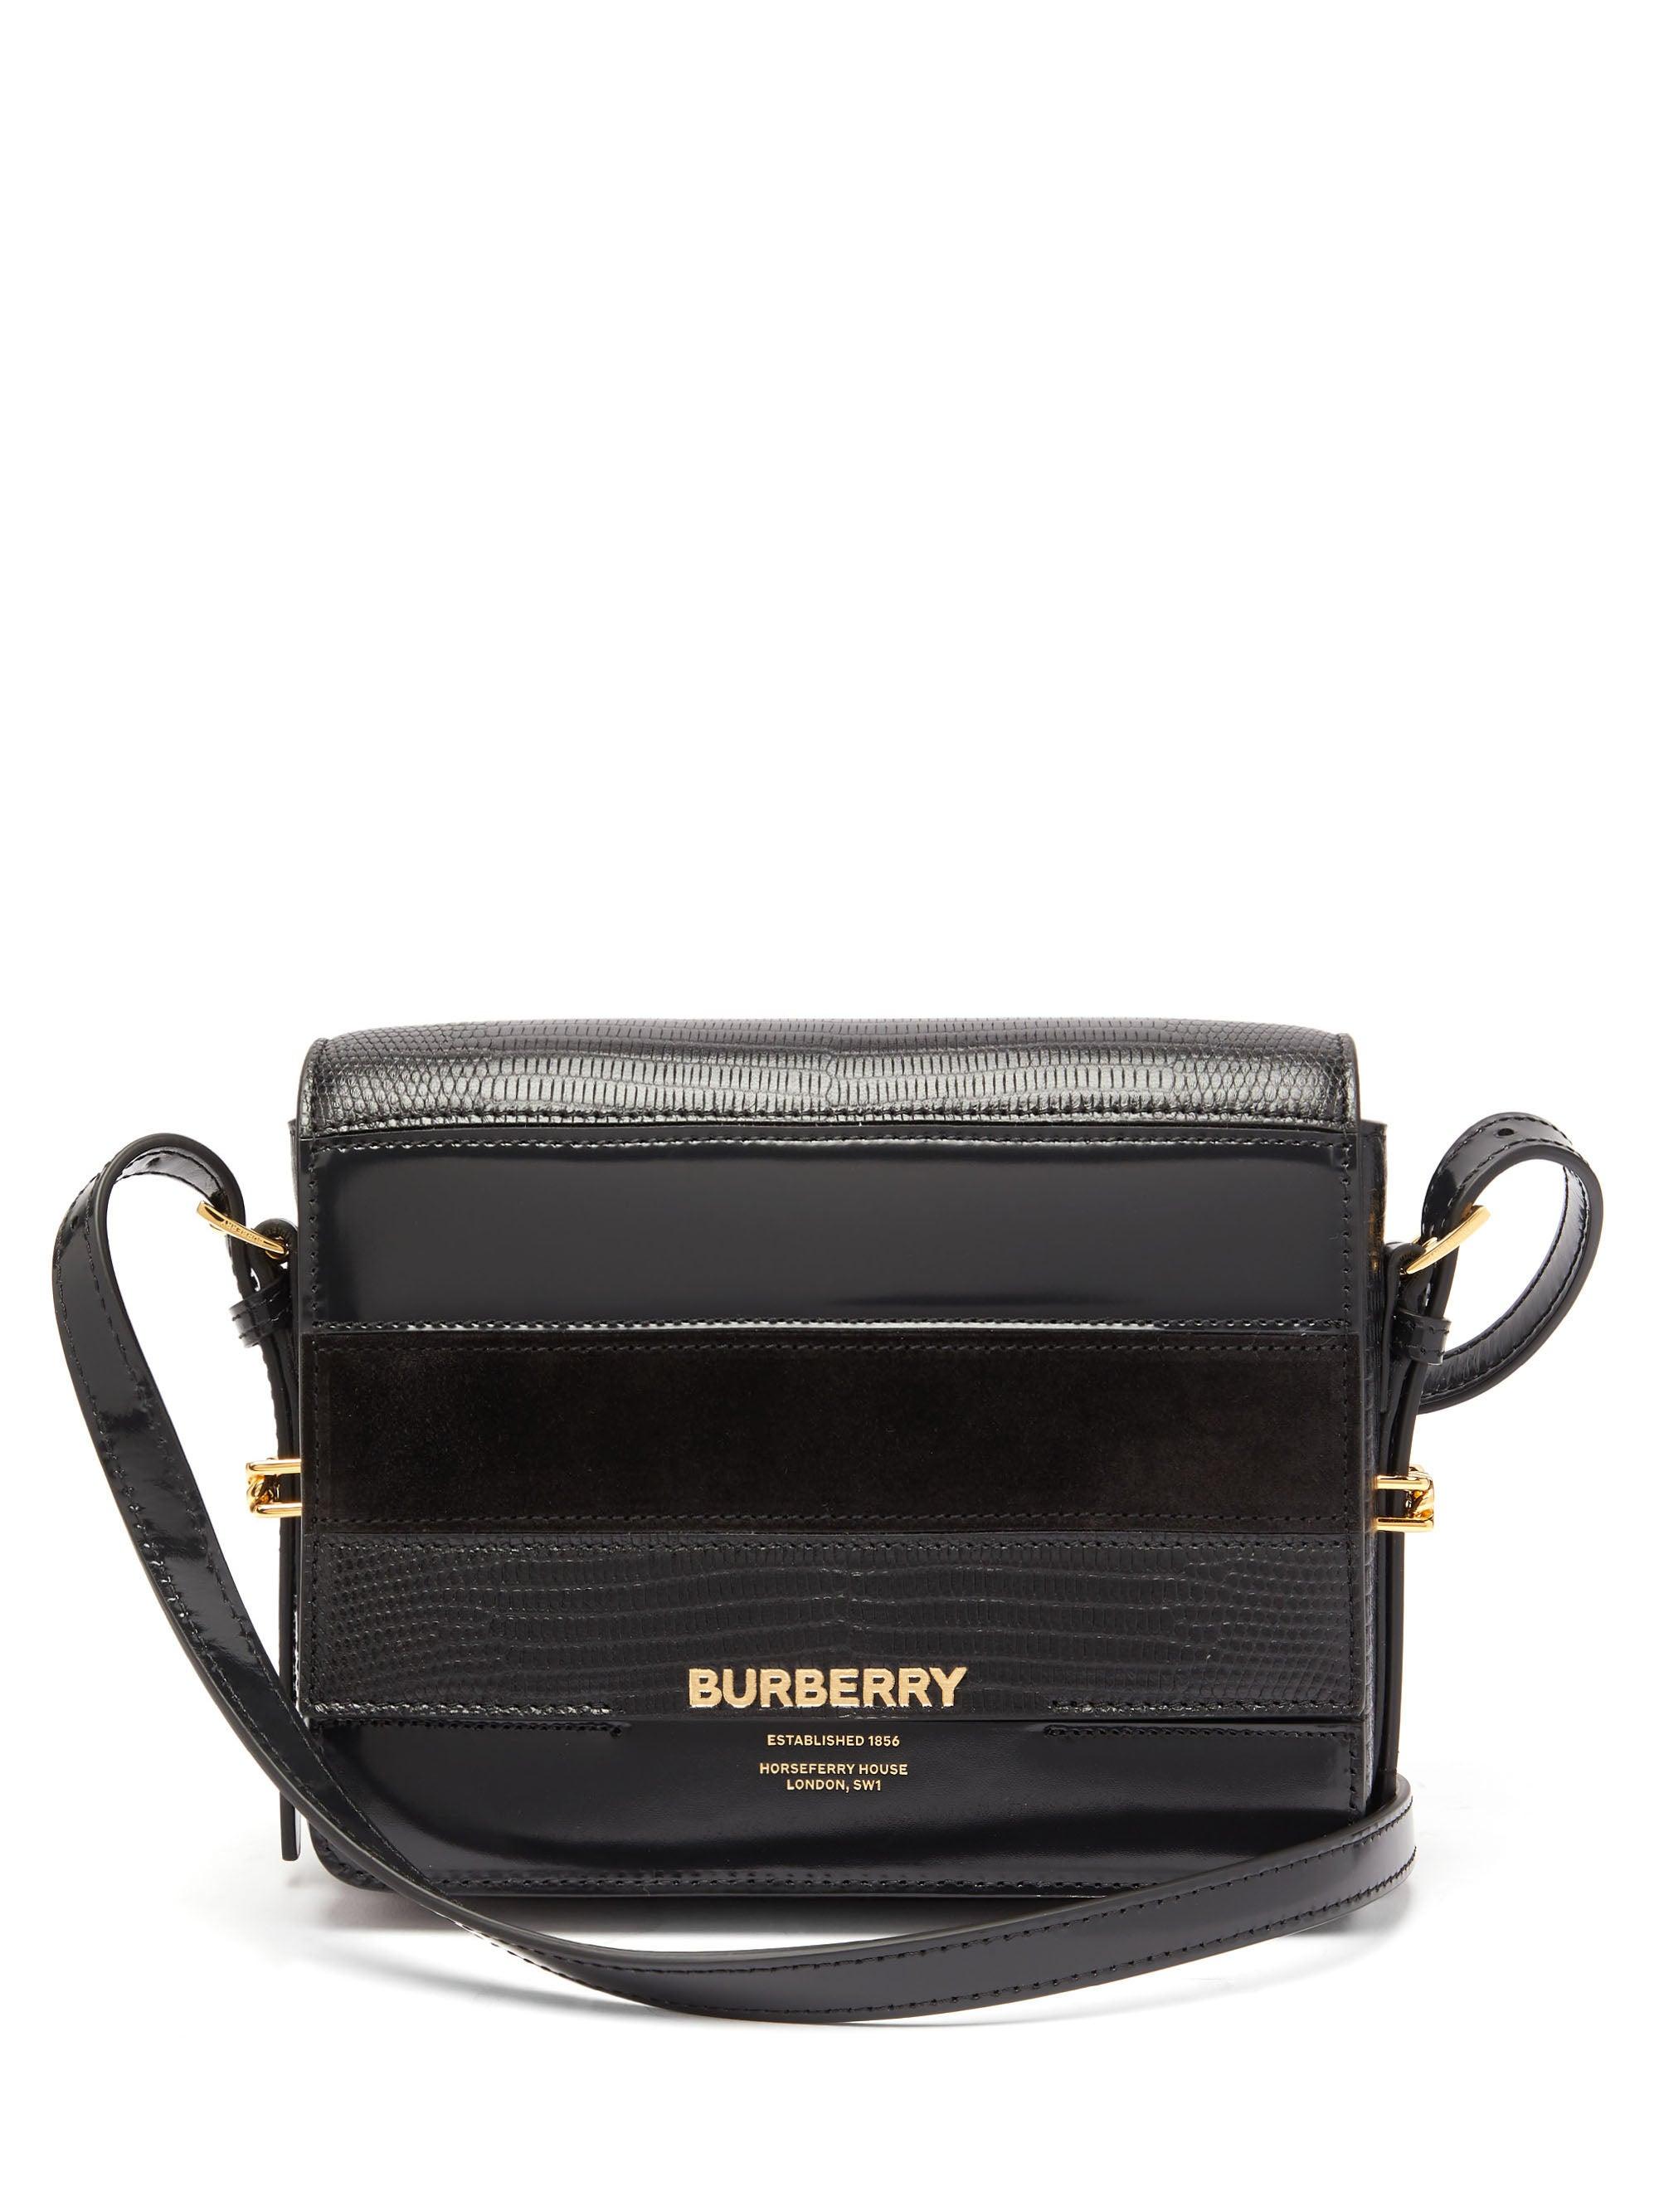 Burberry Grace Small Leather And Suede Shoulder Bag in Black | Lyst